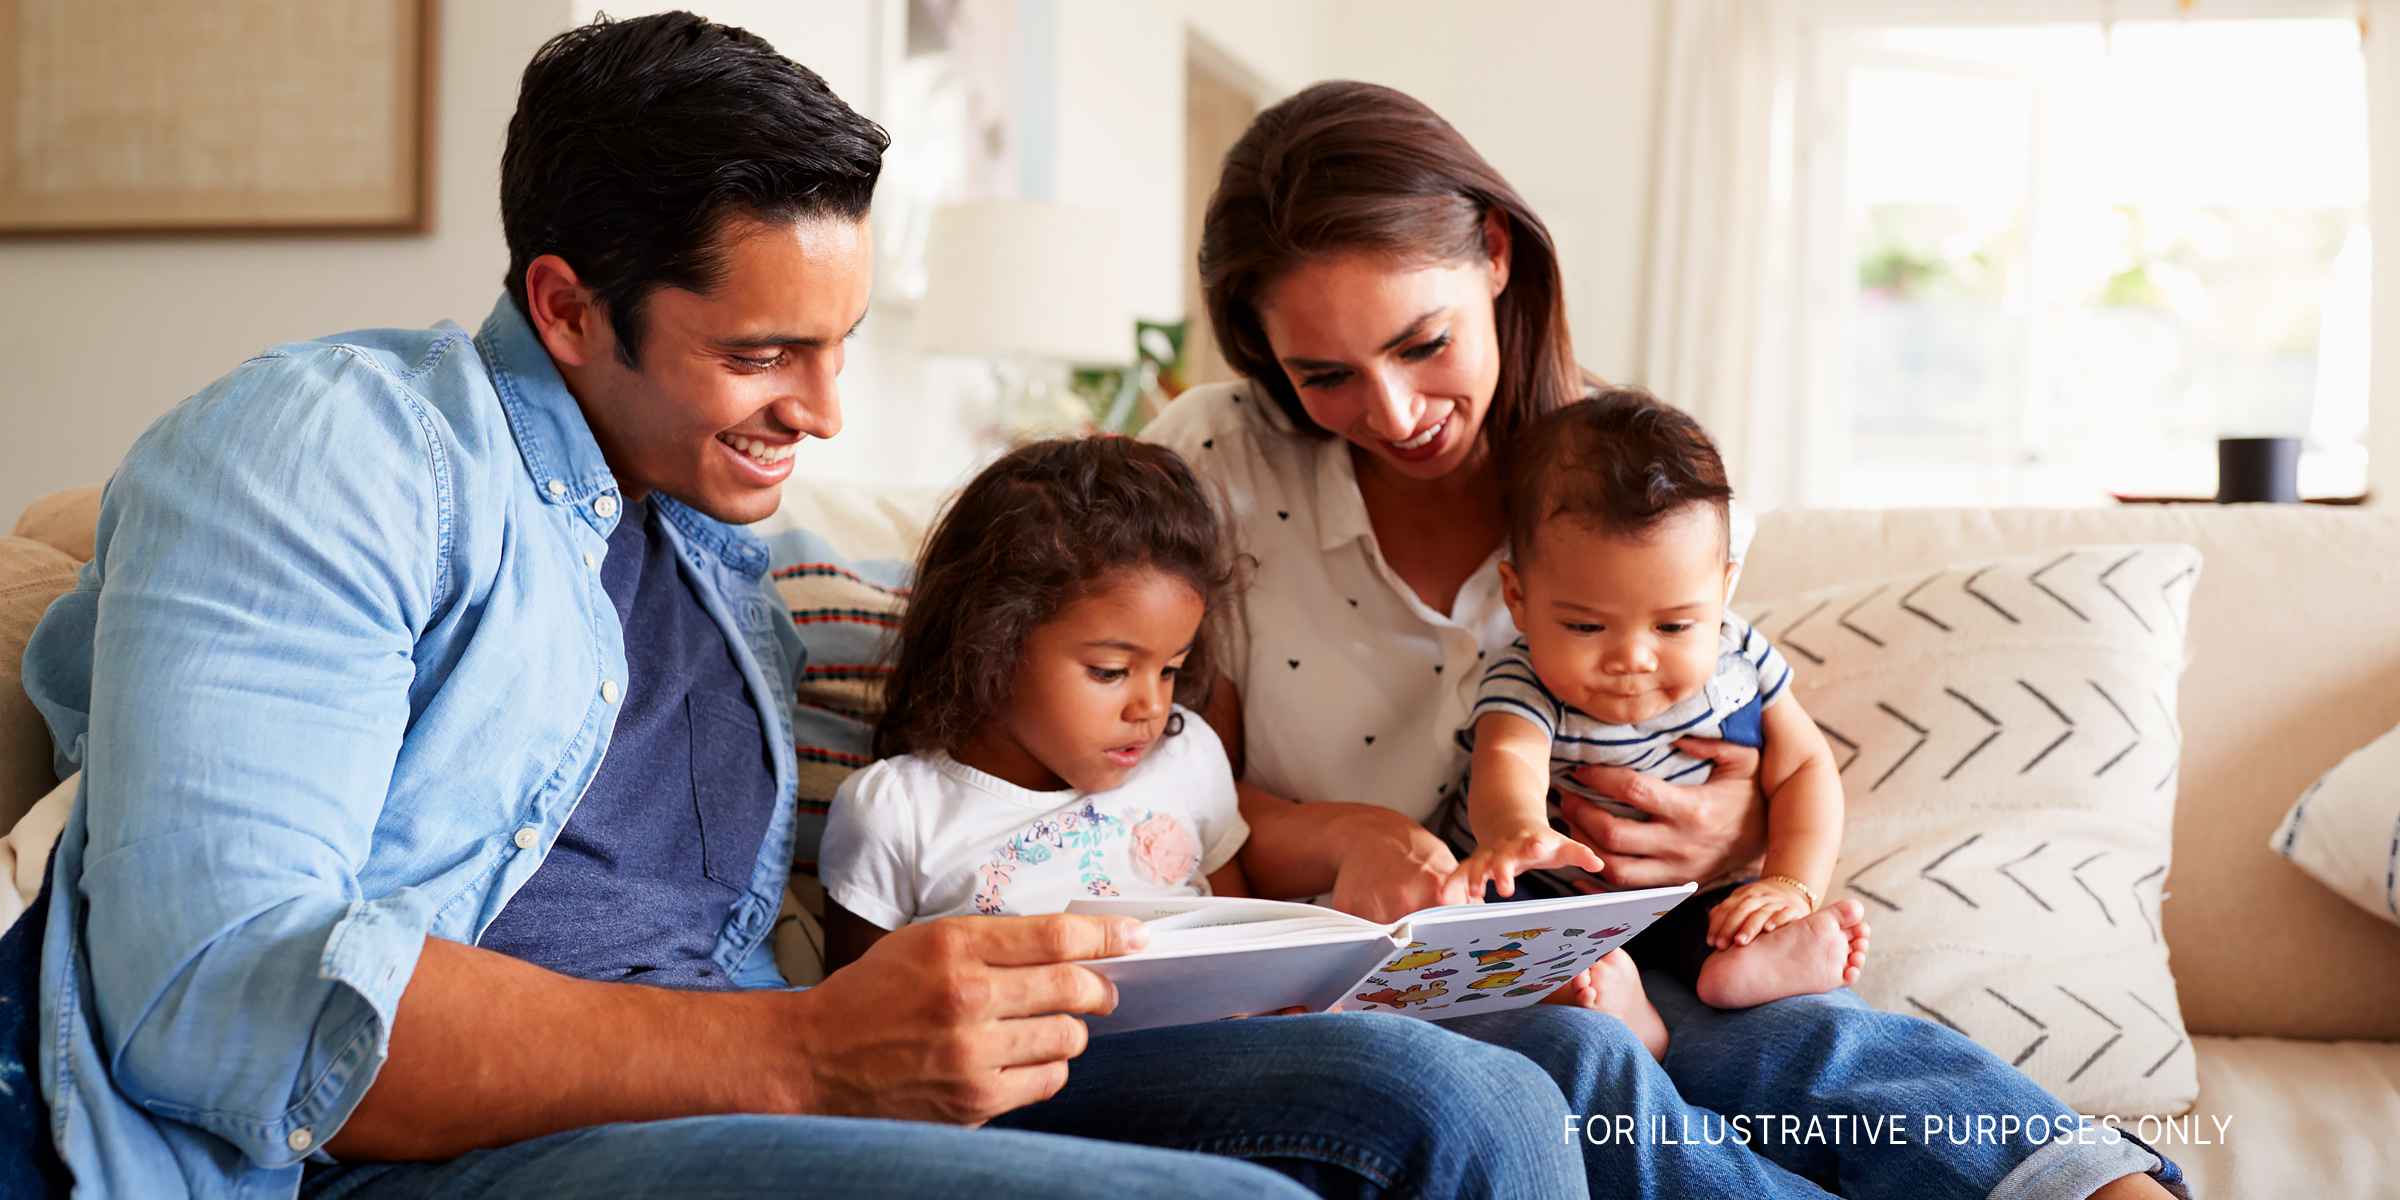 A biracial family sitting on a sofa reading | Source: Shutterstock